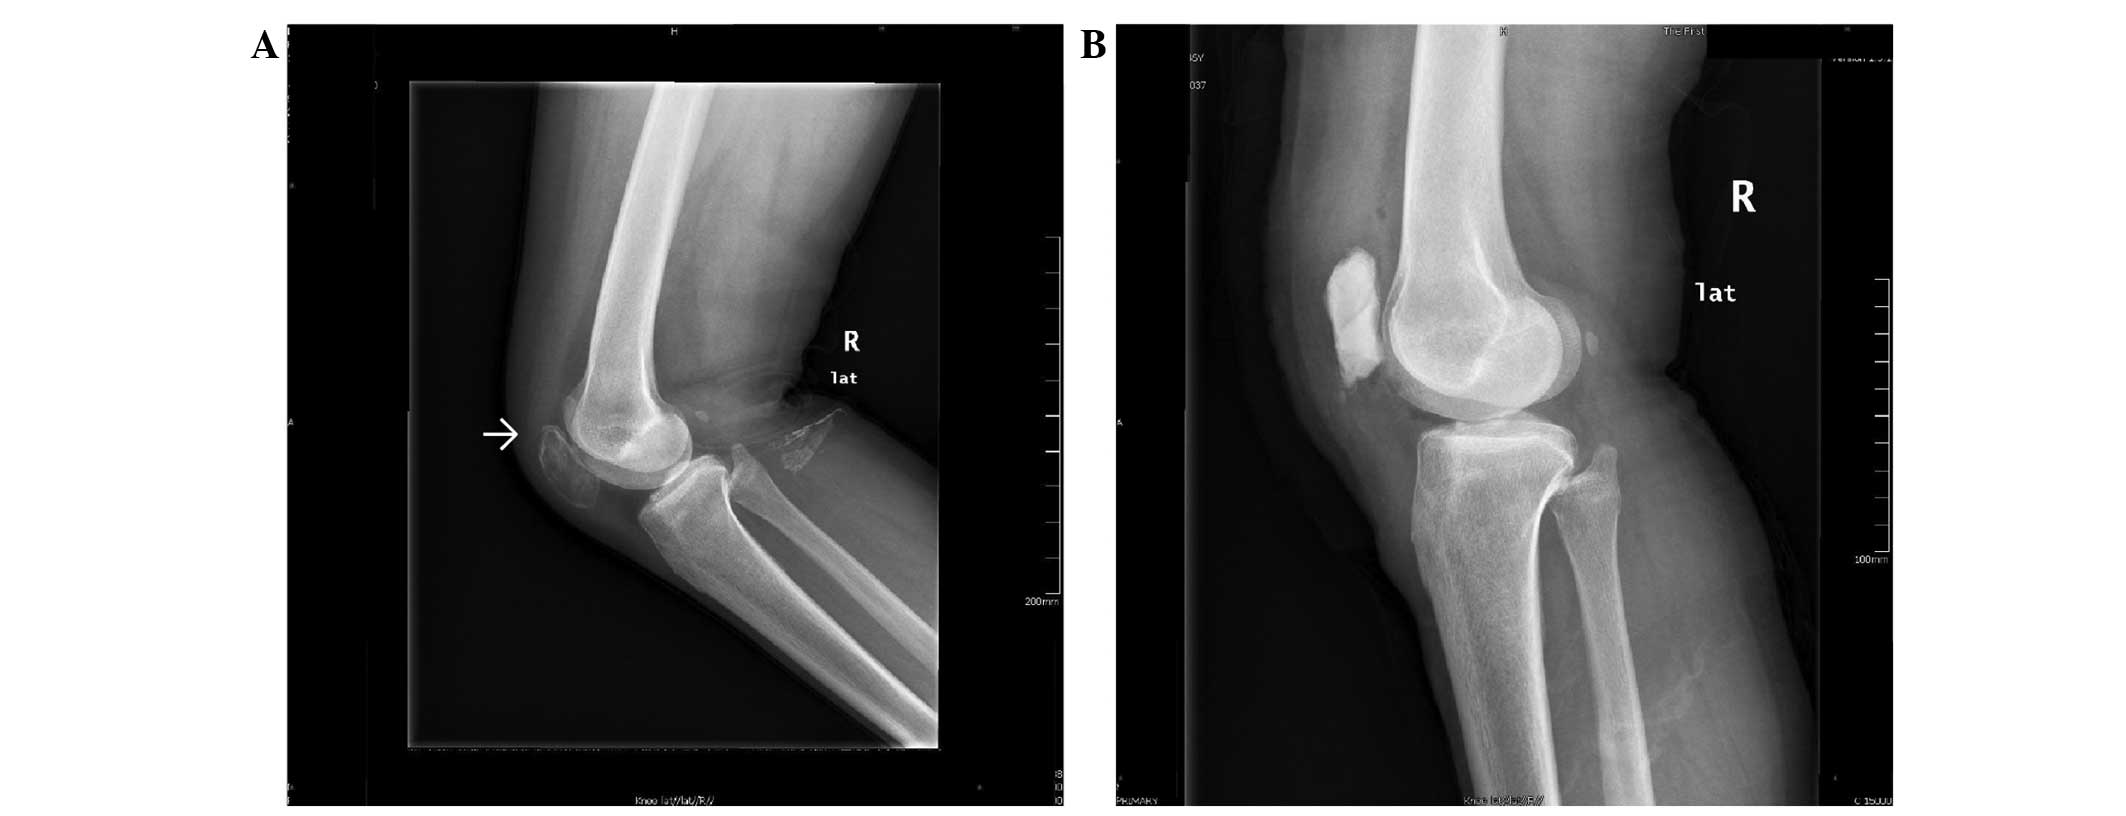 Aneurysmal bone cyst secondary to a giant cell tumor of the patella: A